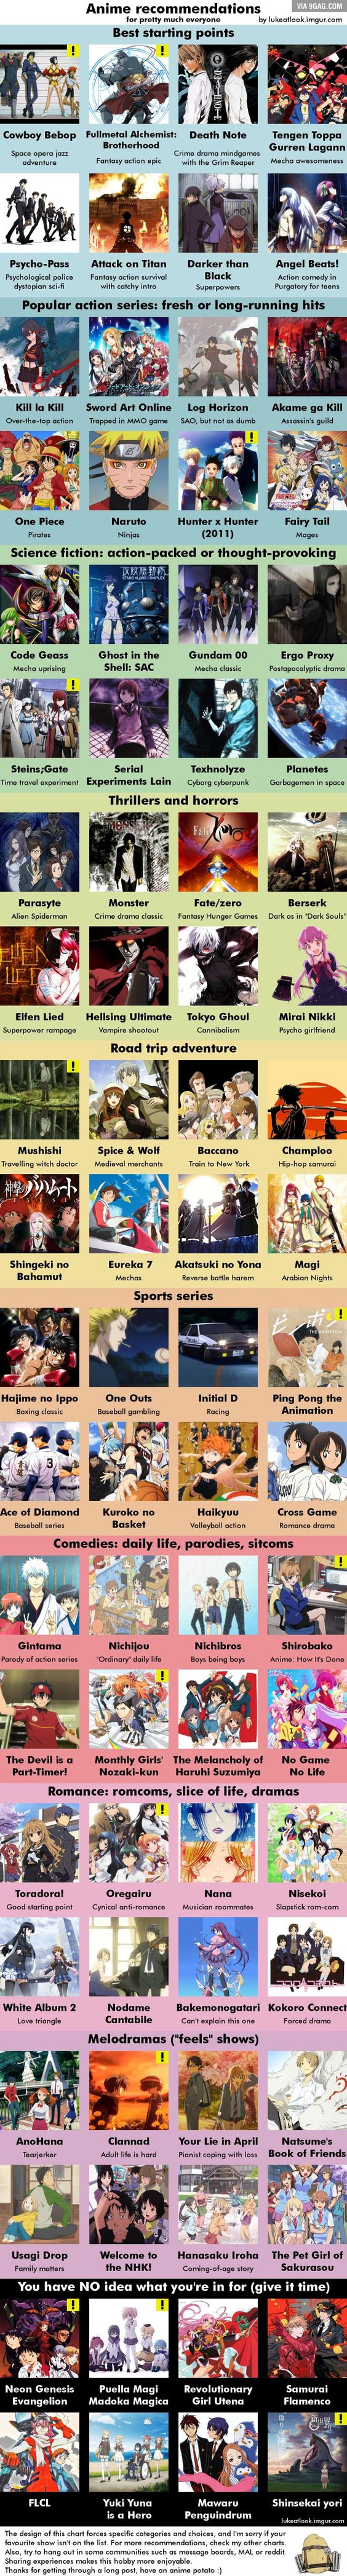 9 categories of anime recommendations for everyone